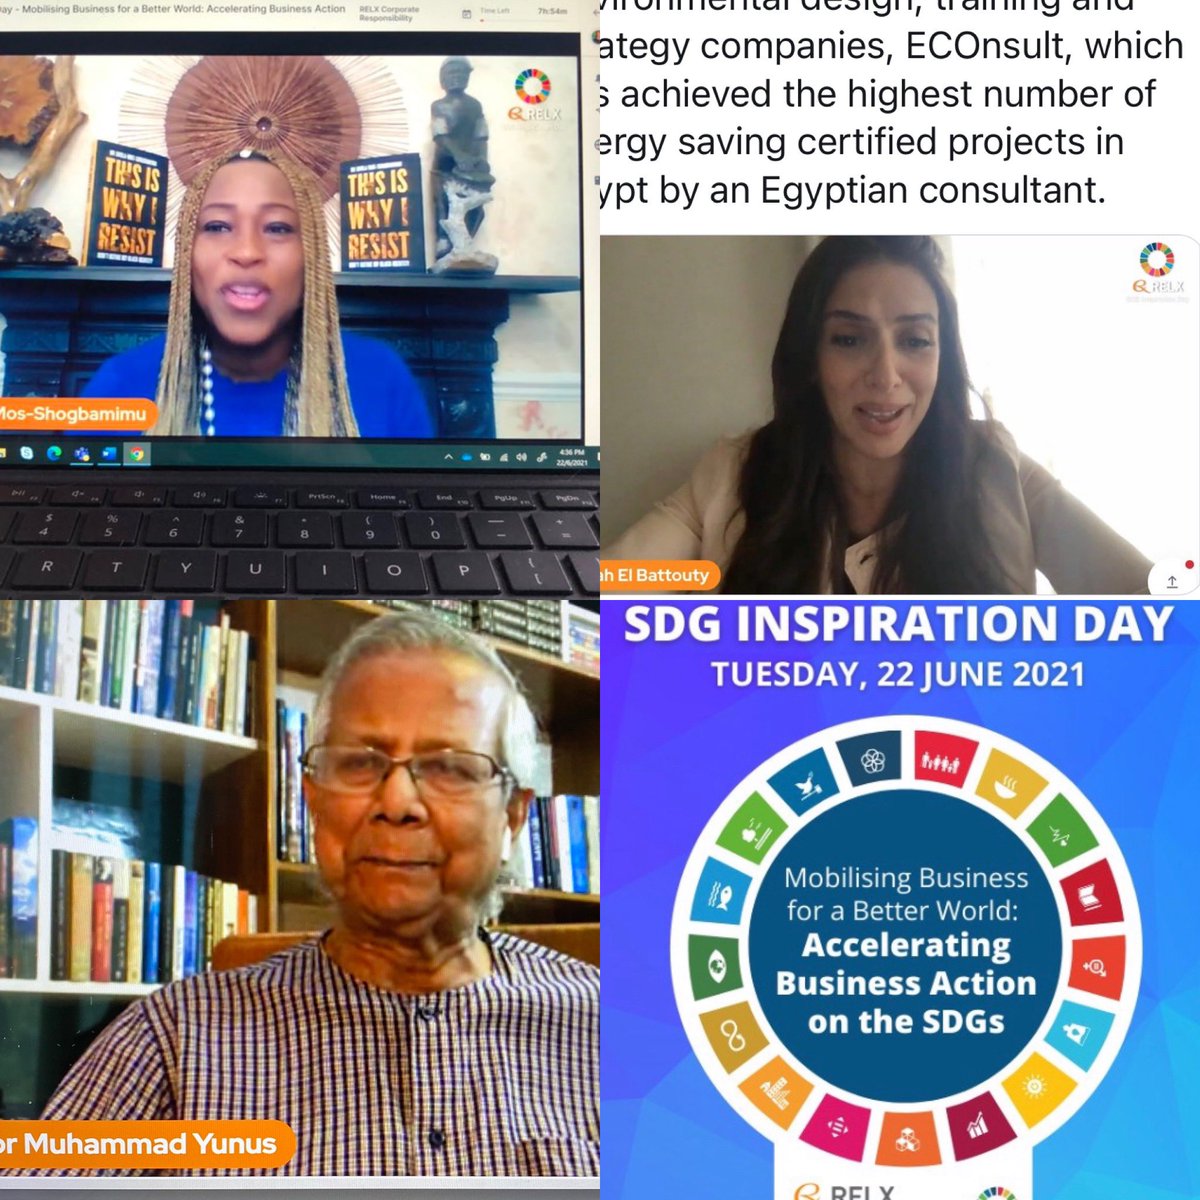 Humbled to be on the same opening speaker with keynote speaker Noble Laureate Entrepreneur mentor Professor @Yunus_Centre , @SholaMos1 on @RELXHQ #sdginspirationsay